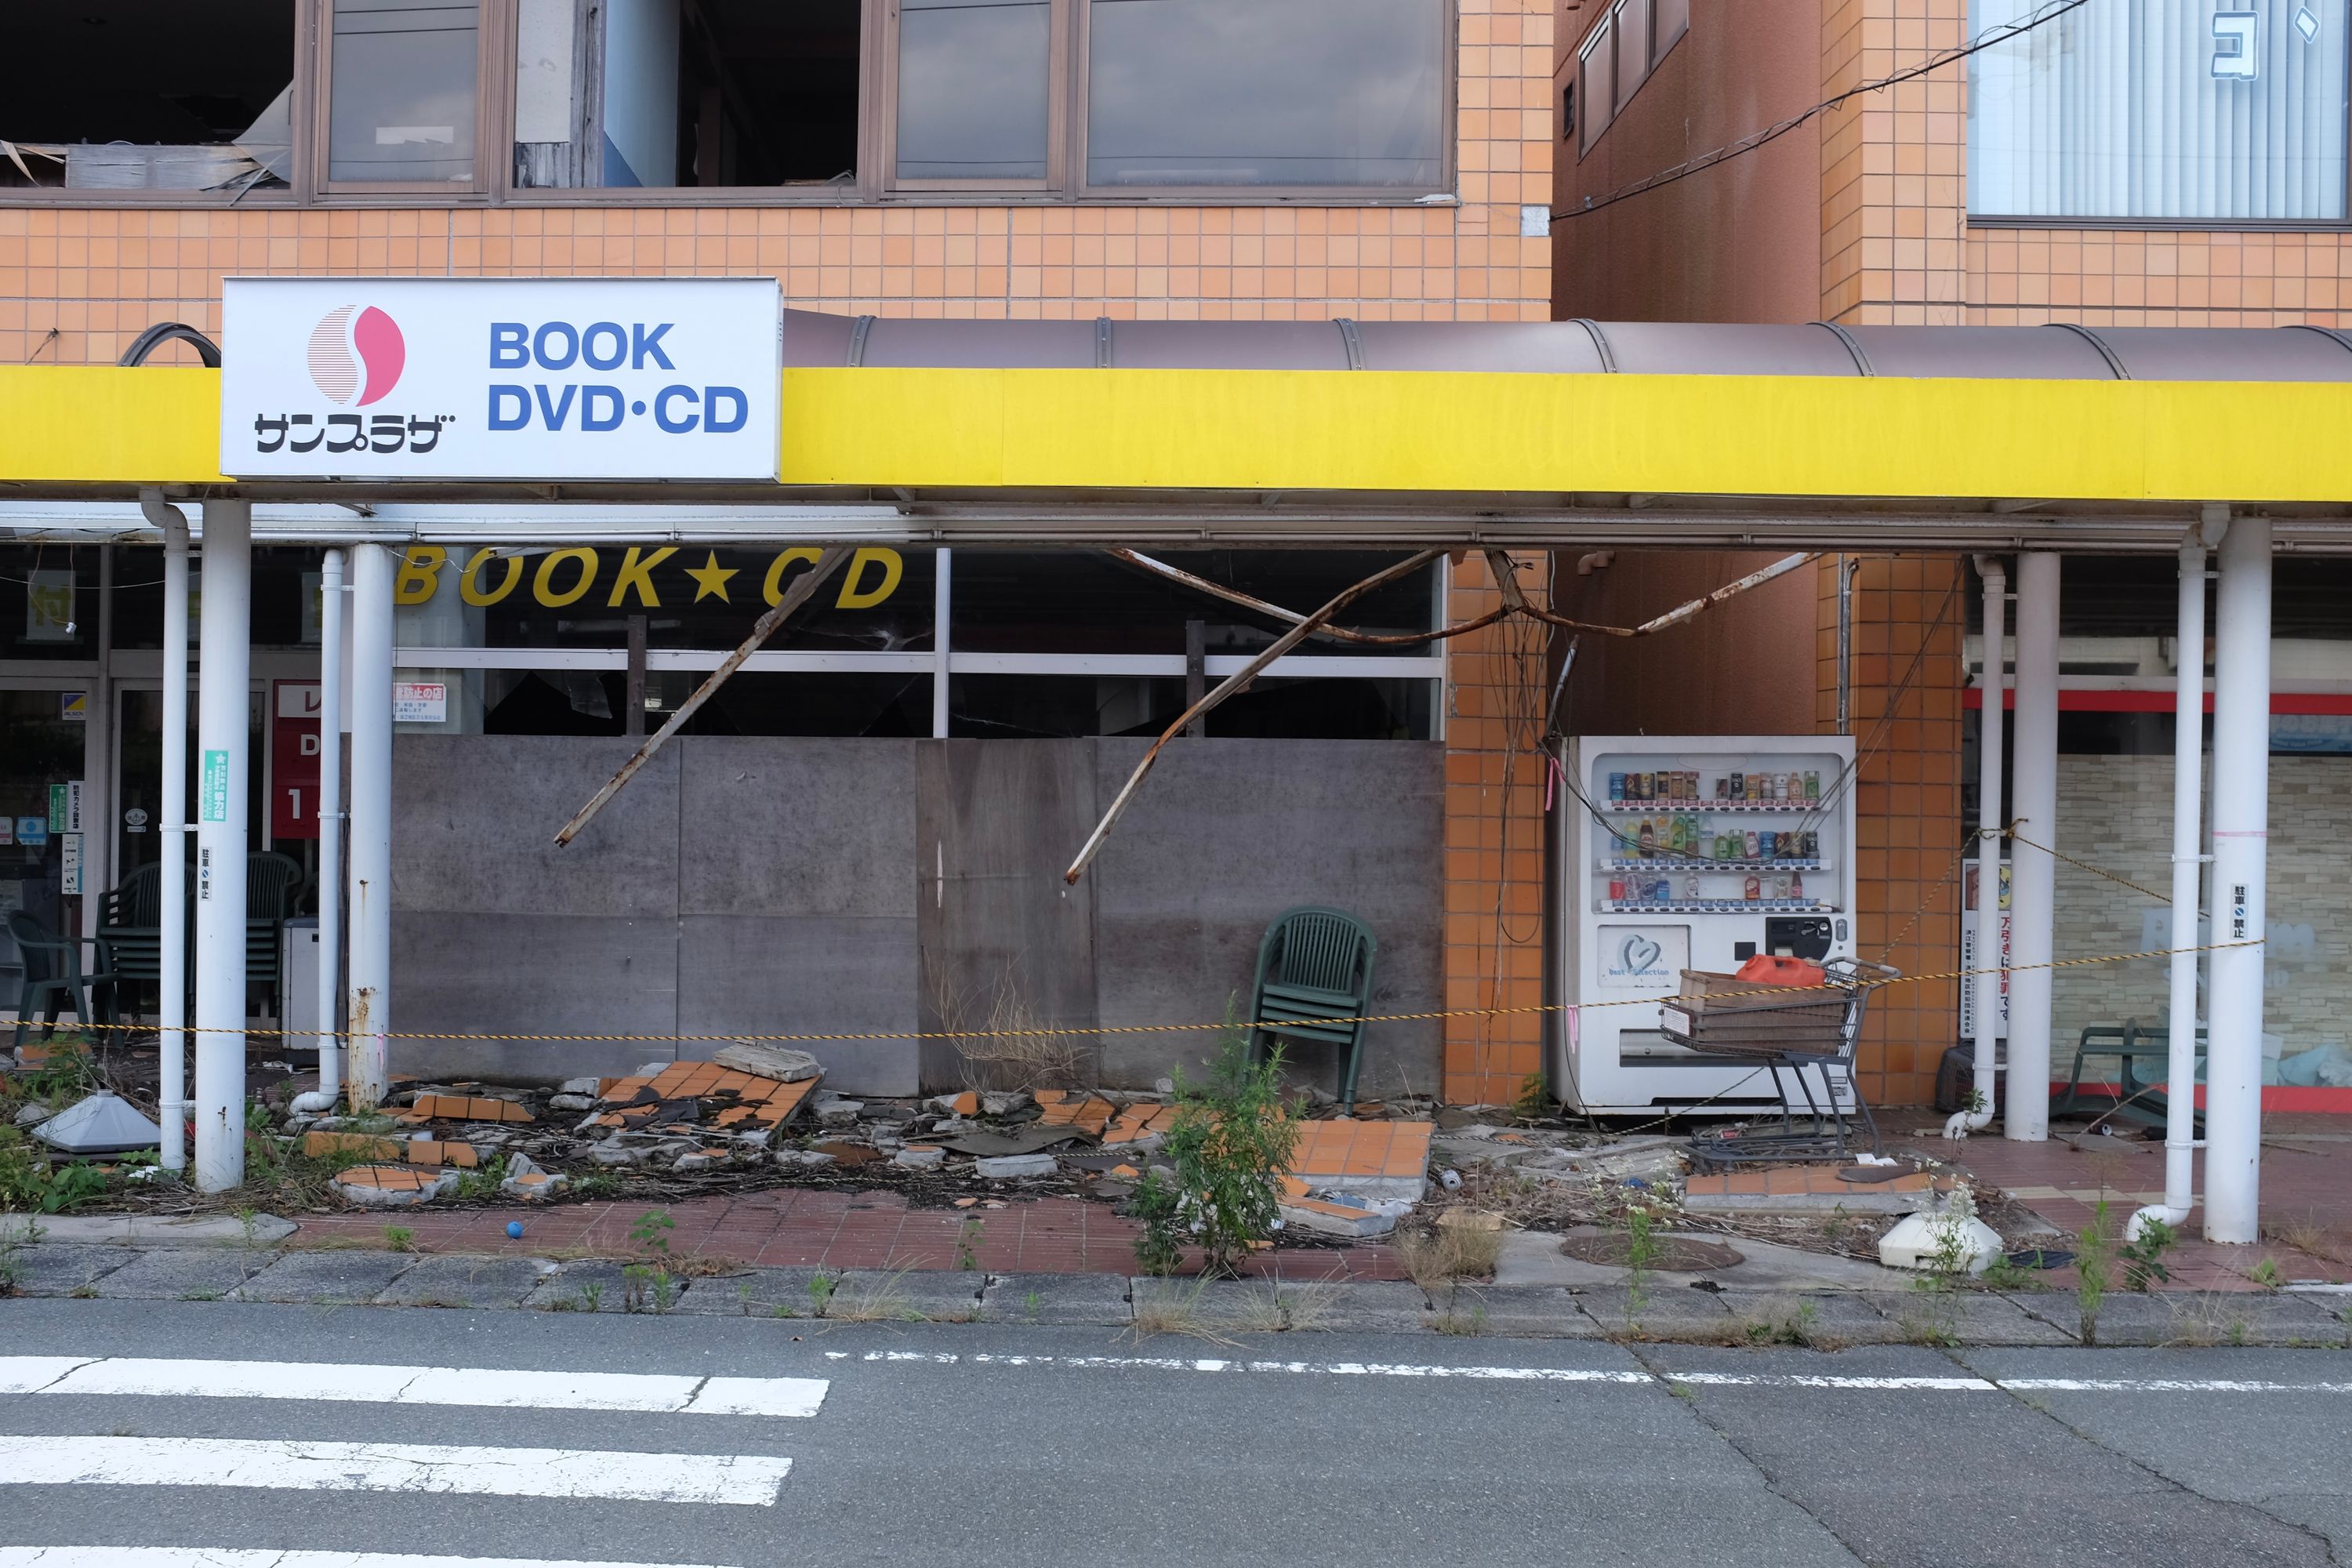 Debris and abandoned items in front of a damaged shop.